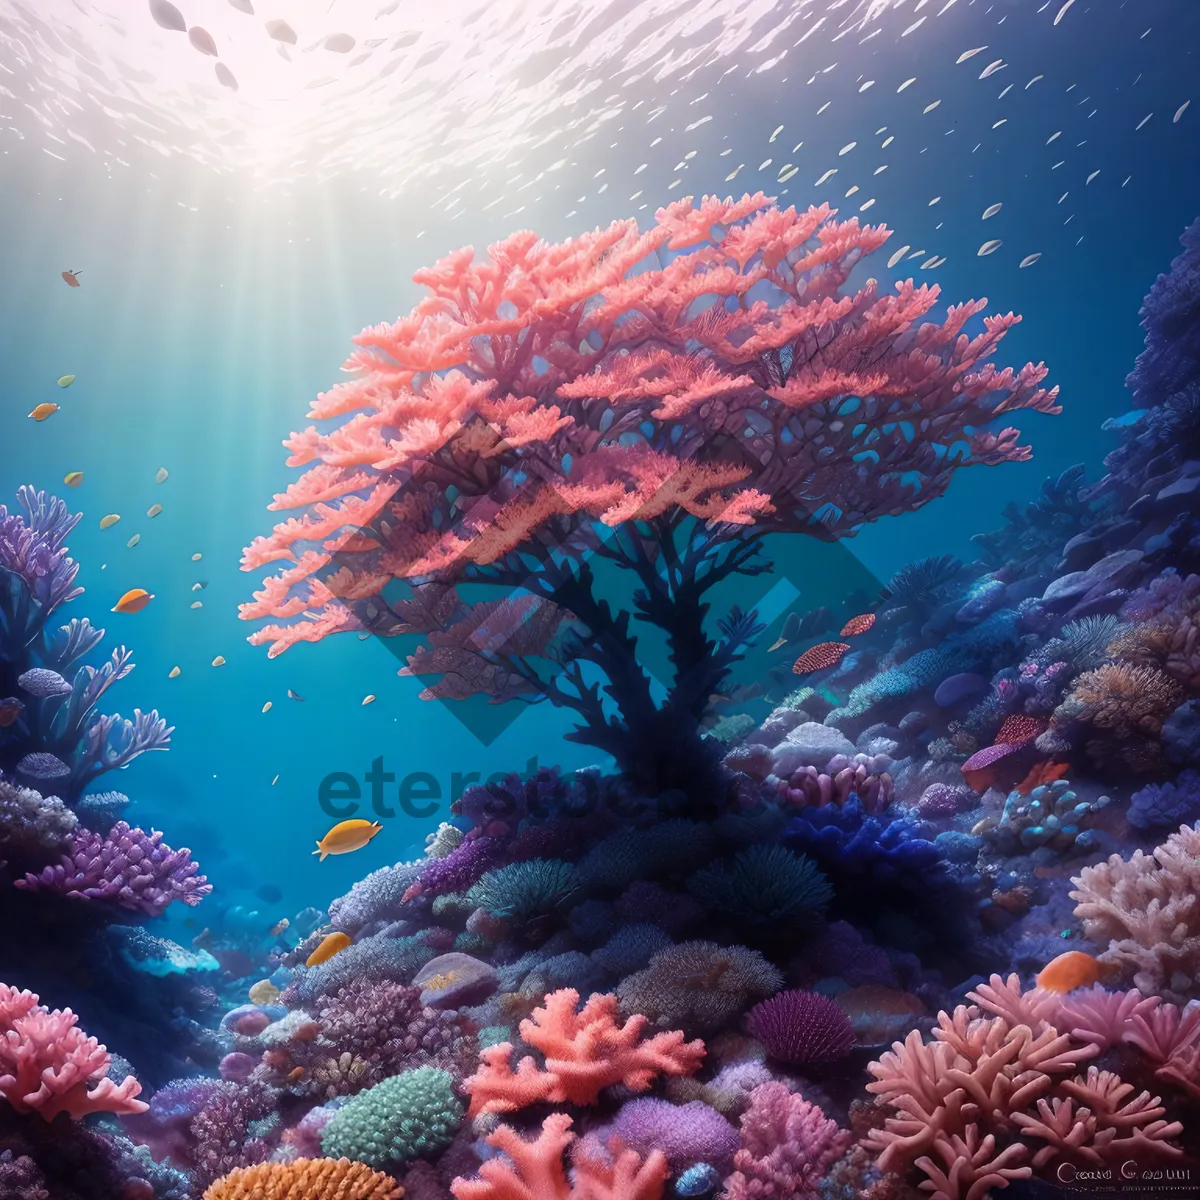 Picture of Vibrant Coral Reef Teeming with Marine Life